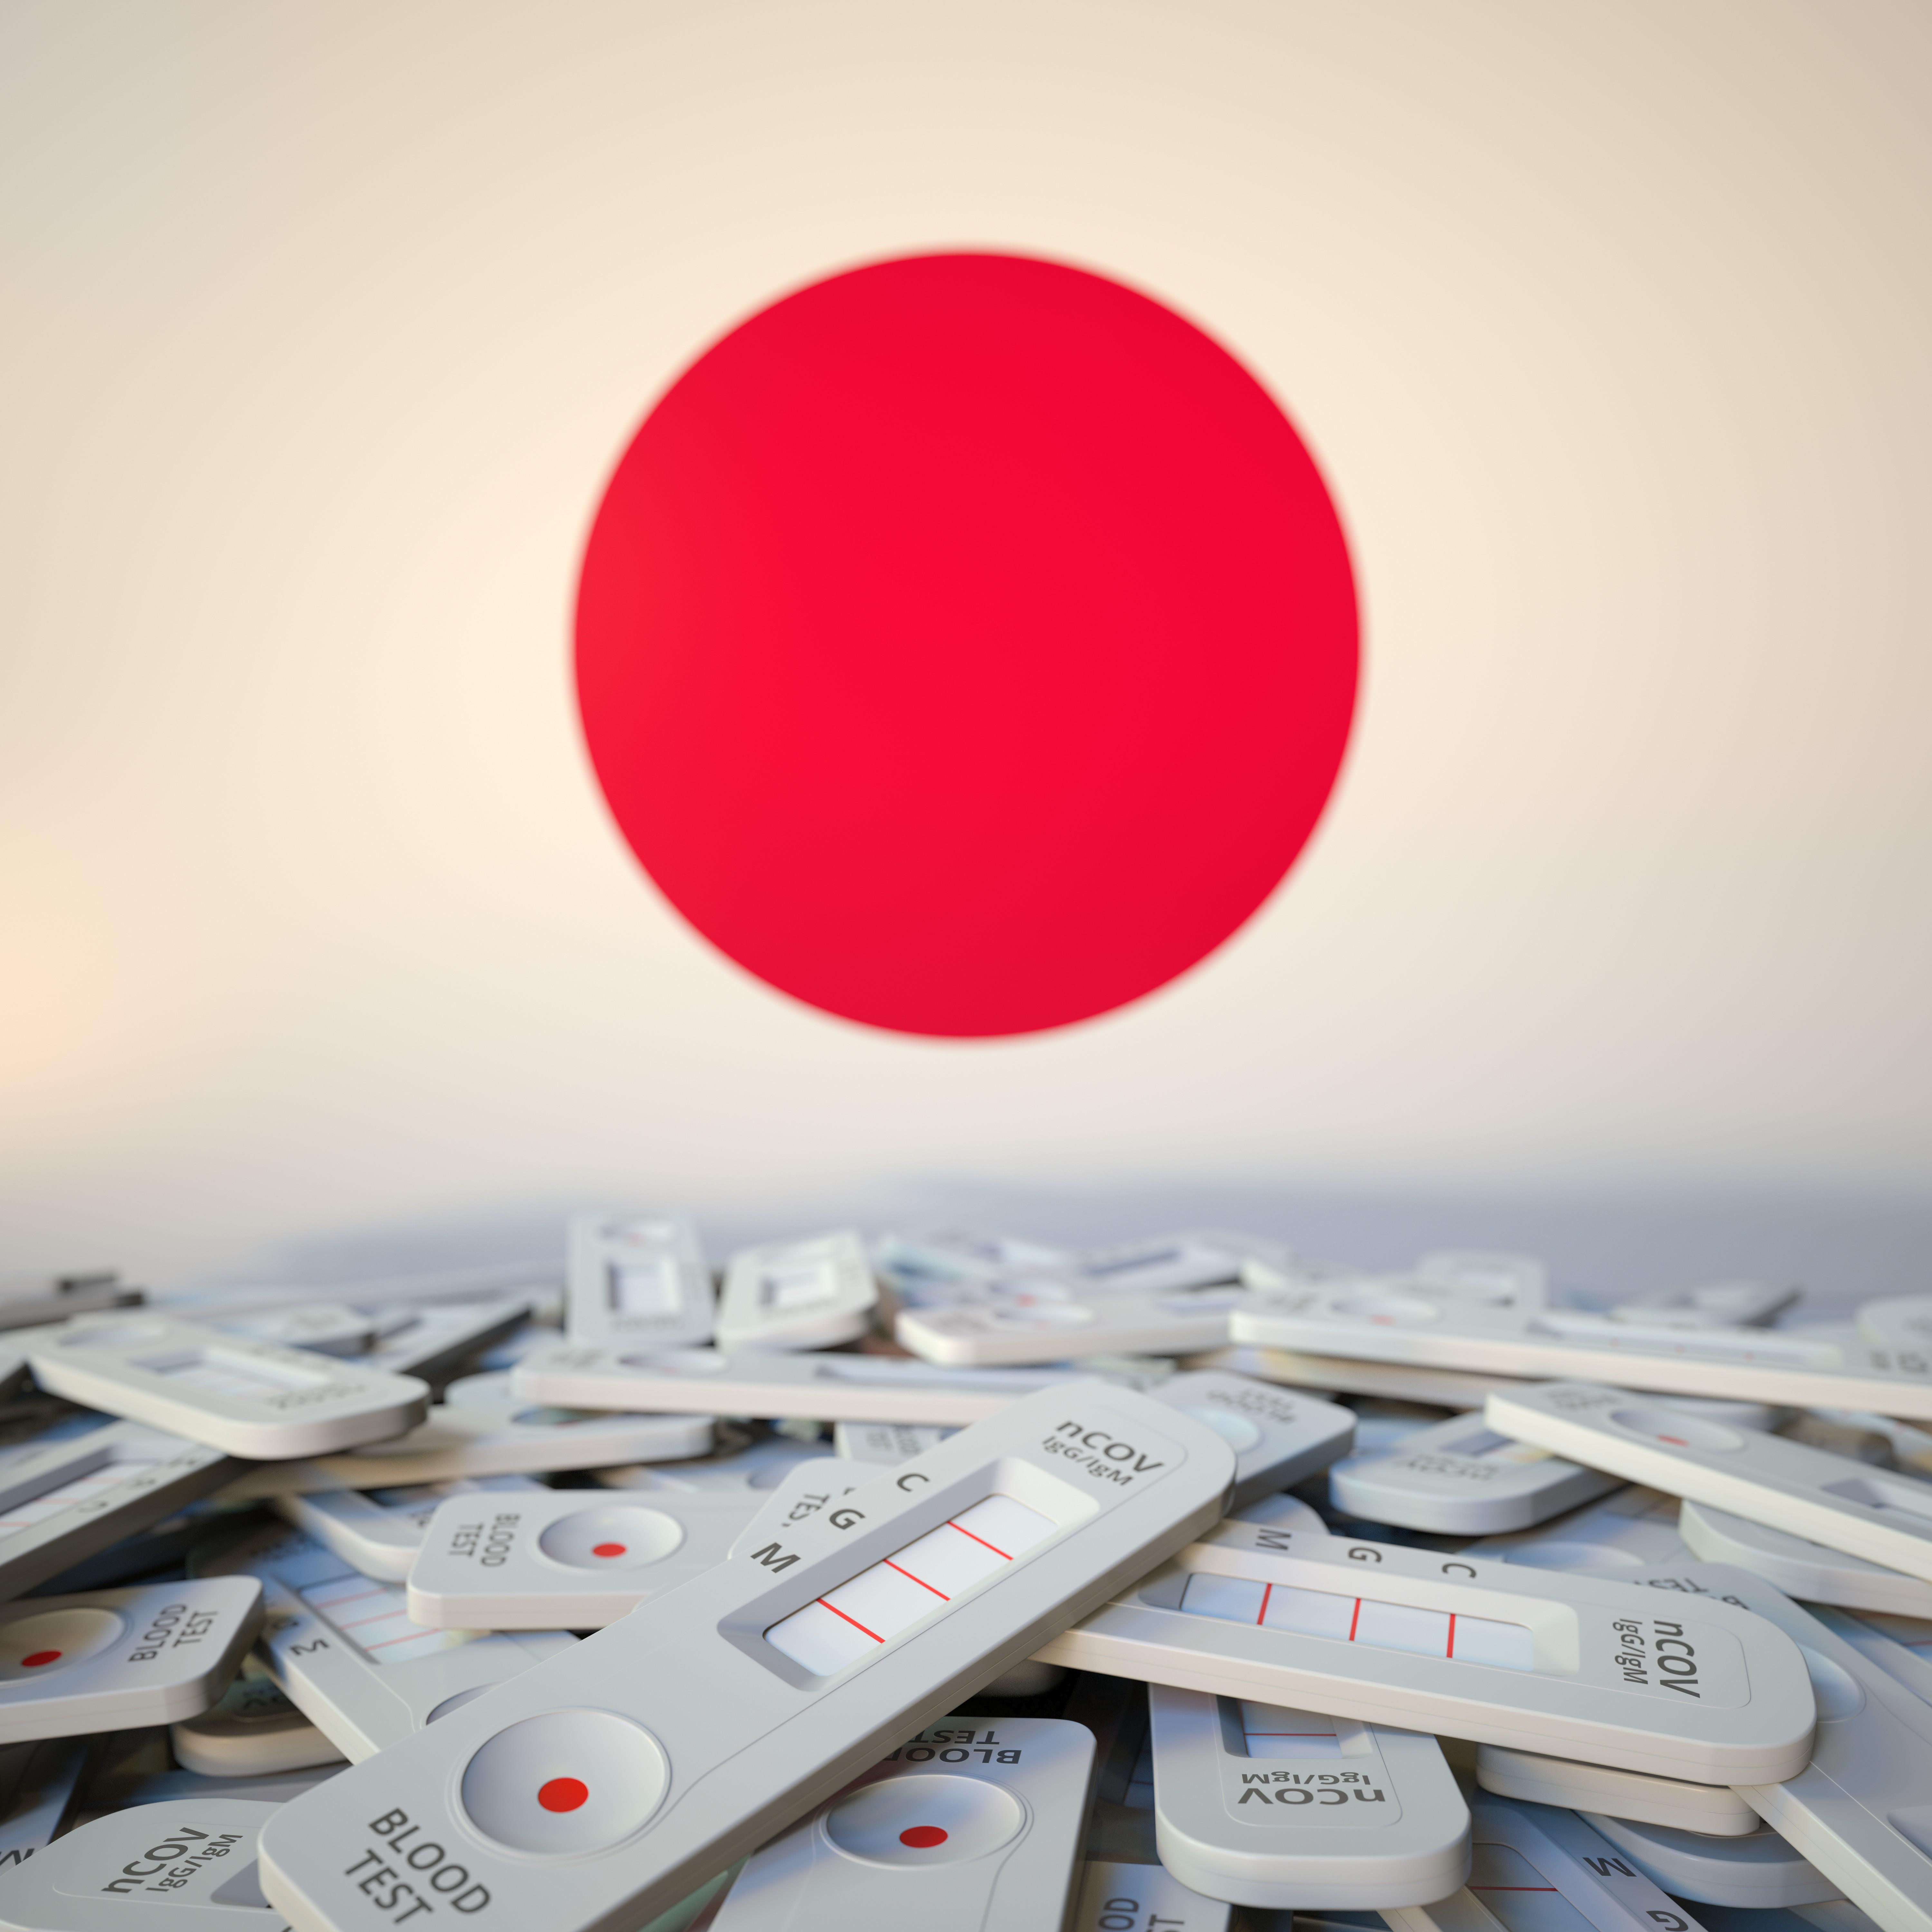 16231737_MotionElements_flag-of-japan-and-disposed.jpg